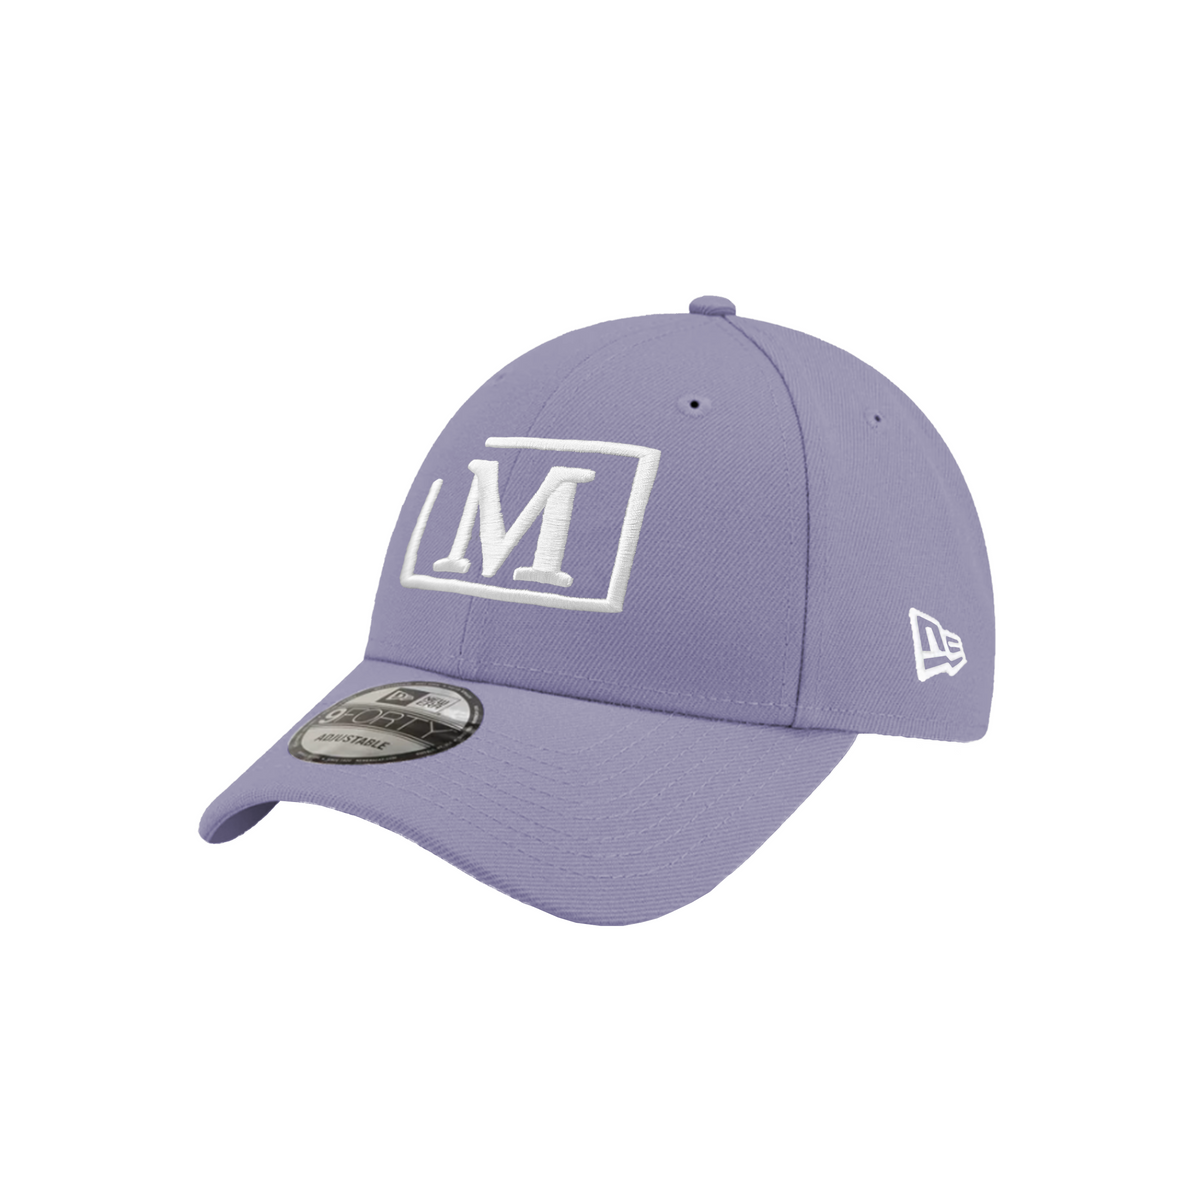 MDB Brand x New Era 9Forty Stretch Snap Embroidered Cap - Soft Colors